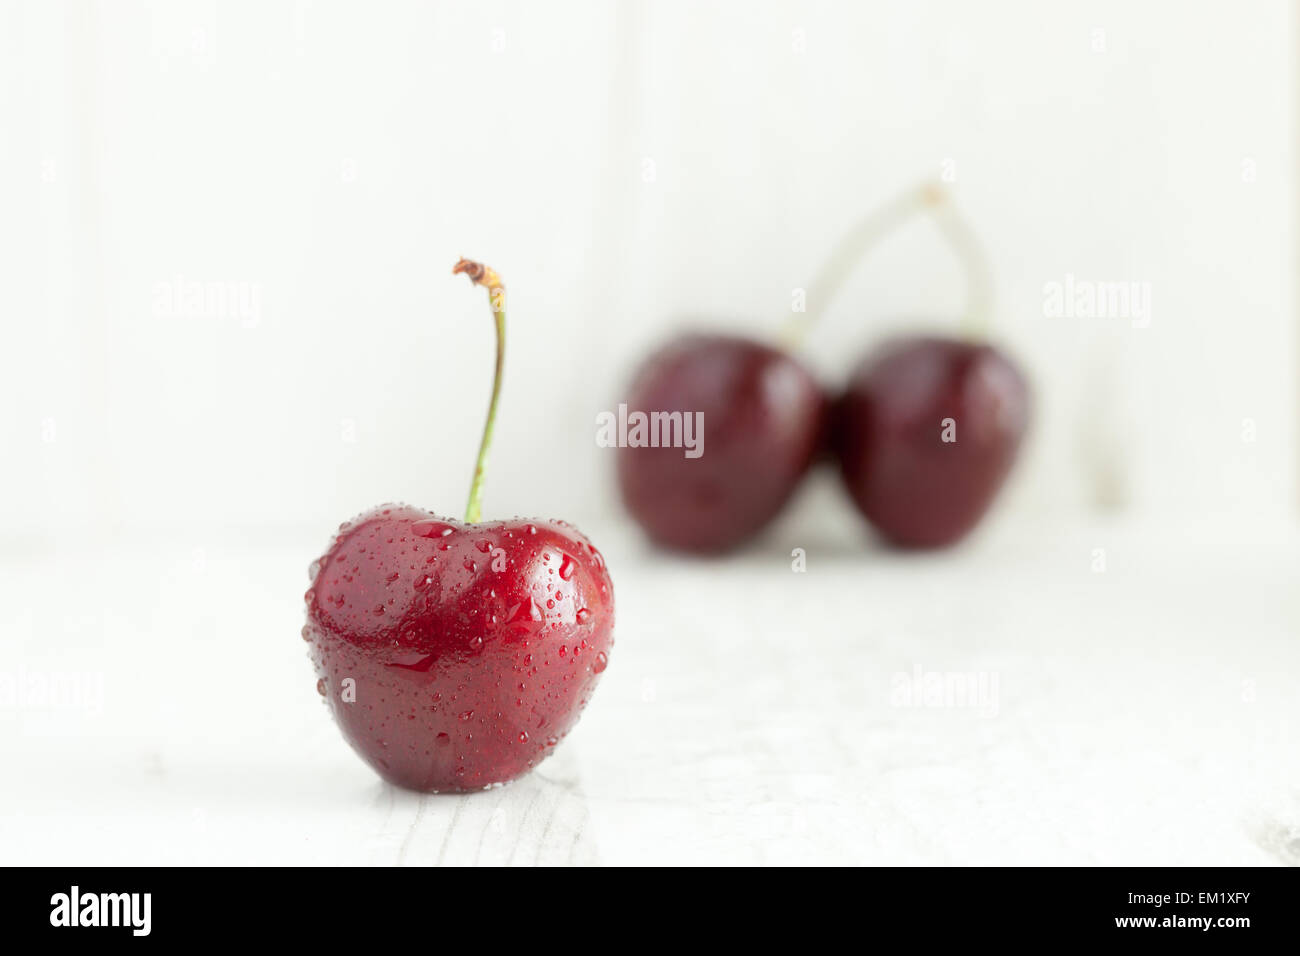 Cherry with water droplets Stock Photo